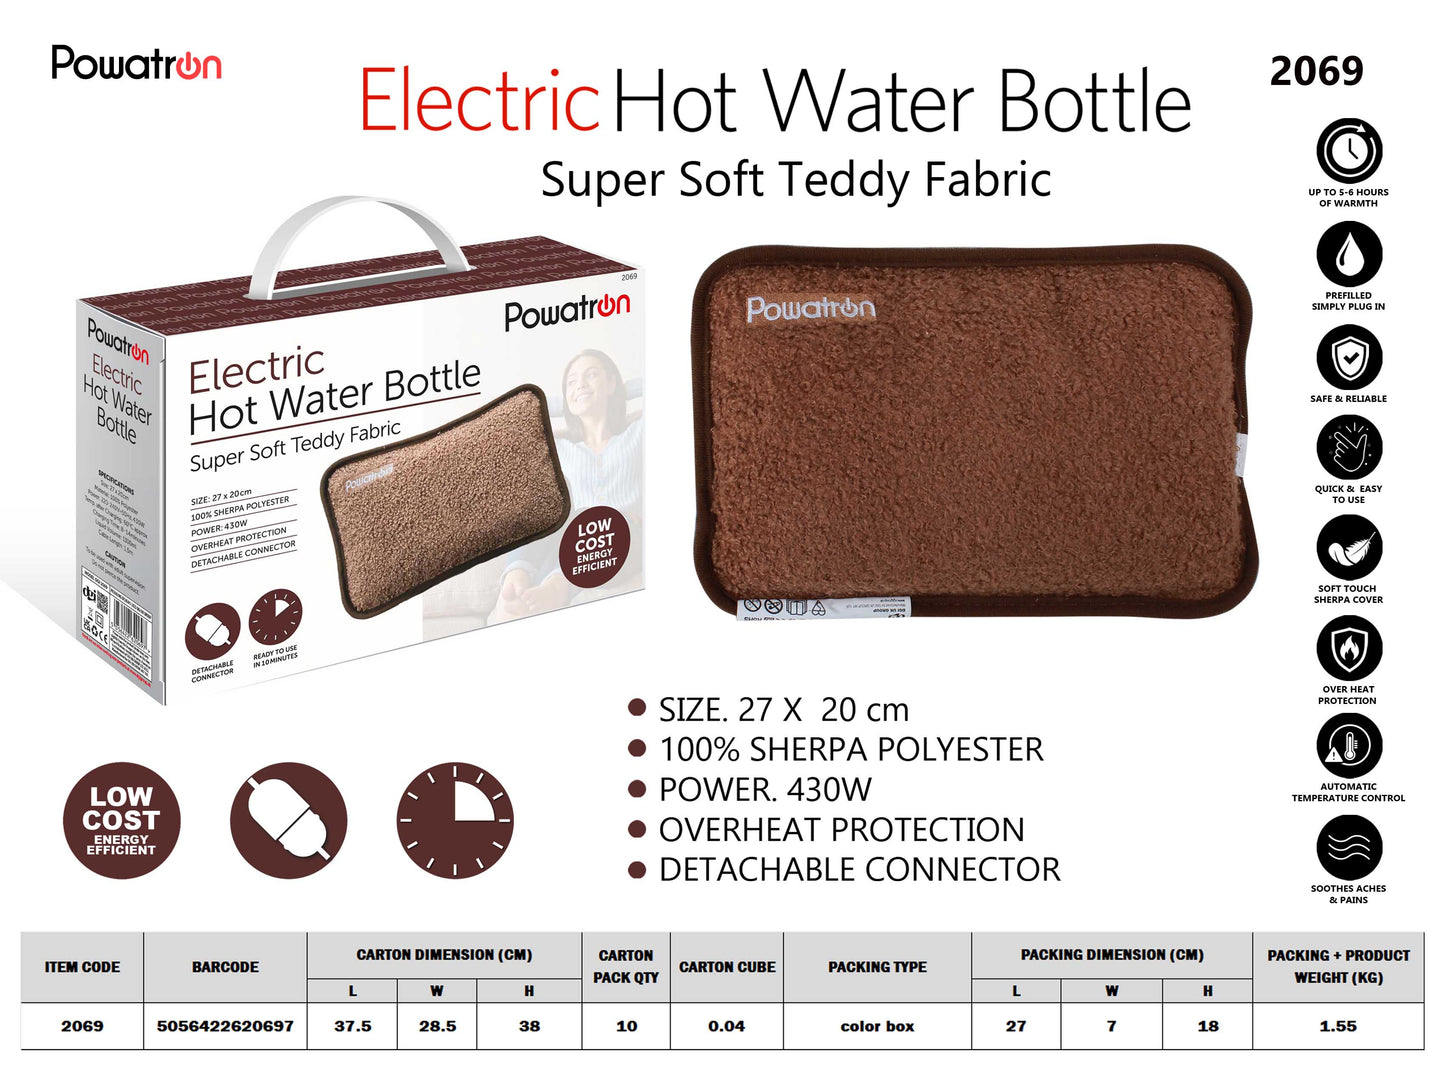 Electric Hot Water Bottles Teddy Fabric (Brown)